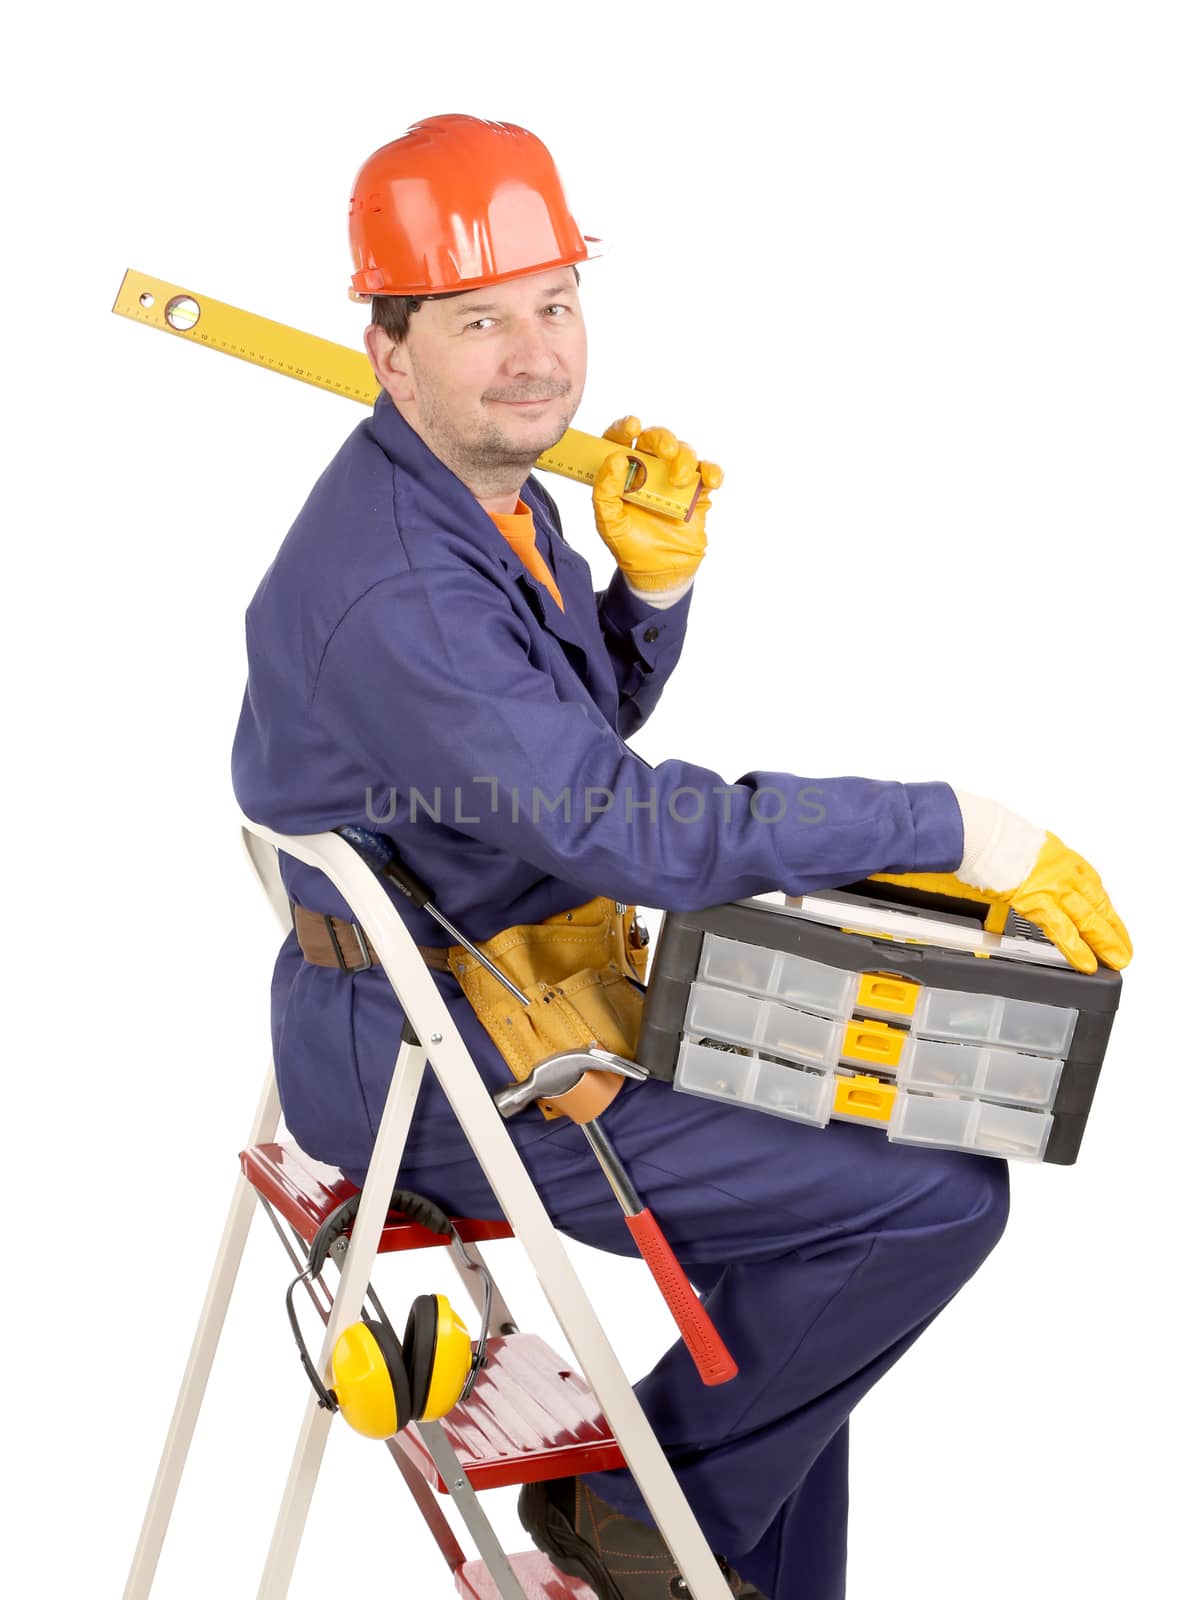 Worker on ladder with ruler and toolbox. Isolated on a white backgropund.